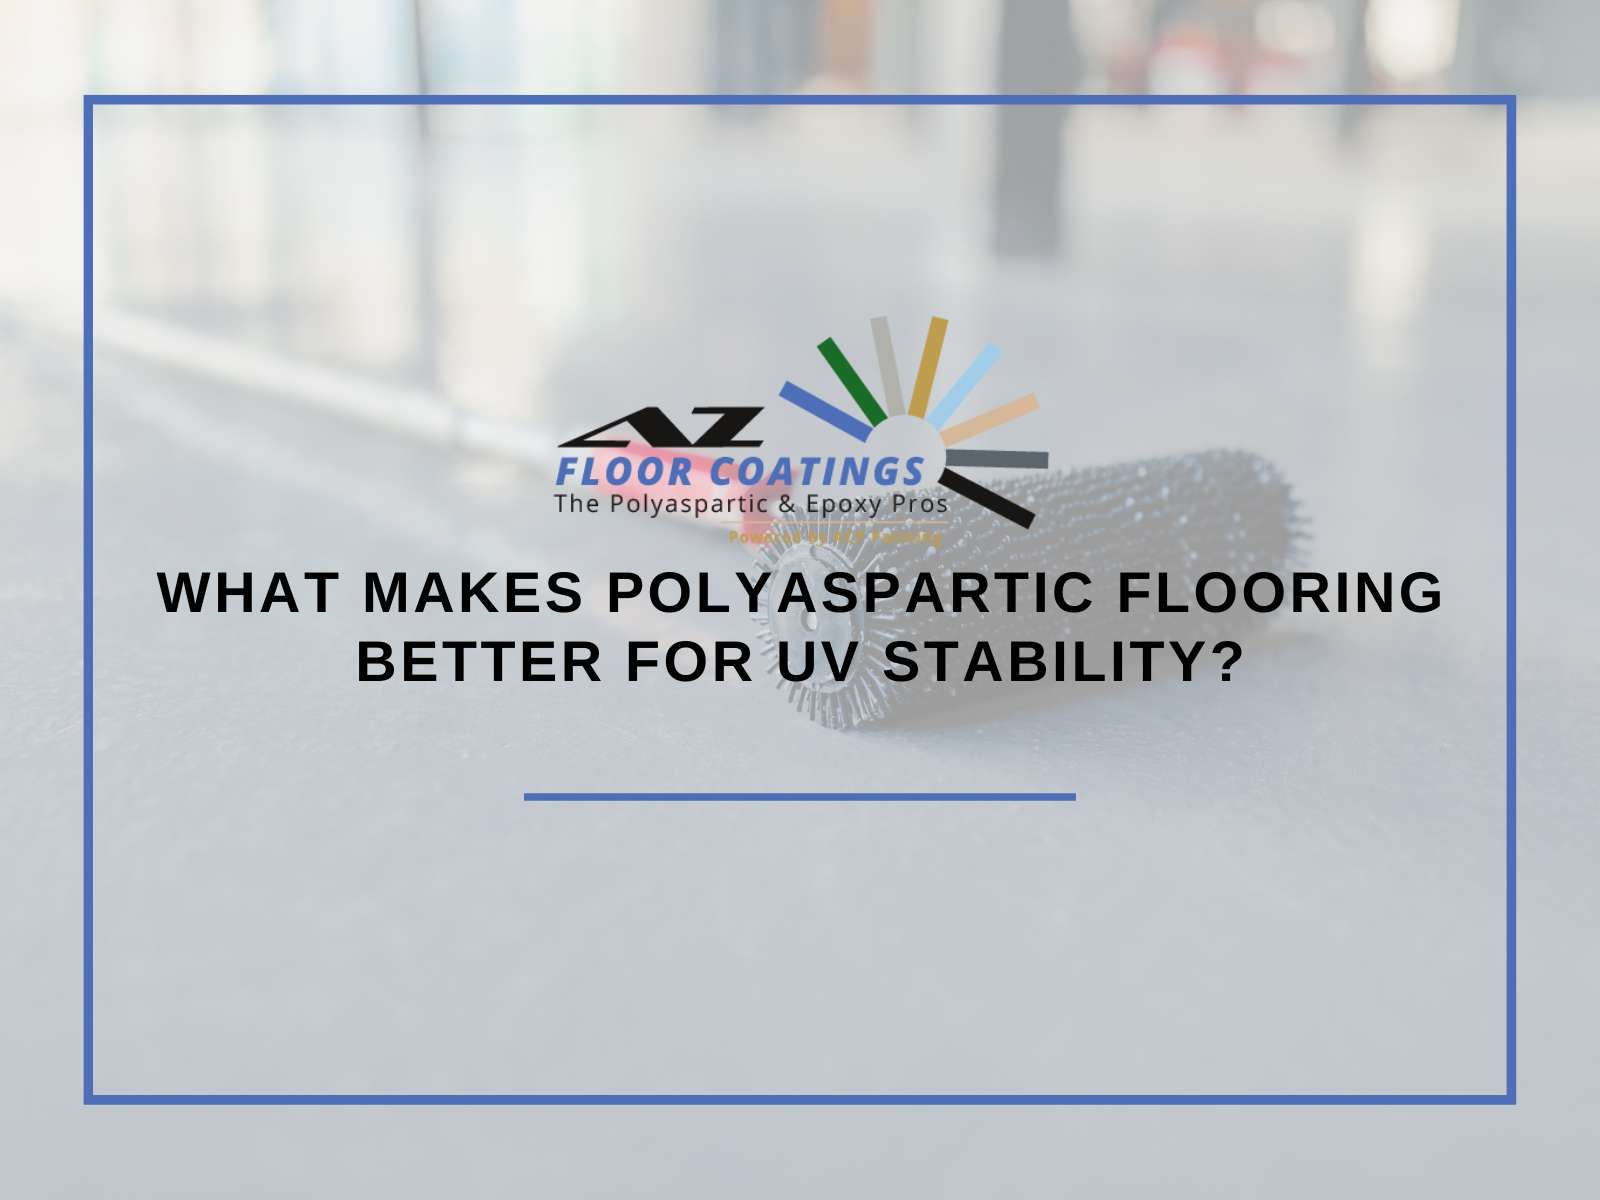 What Makes Polyaspartic Flooring Better For UV Stability